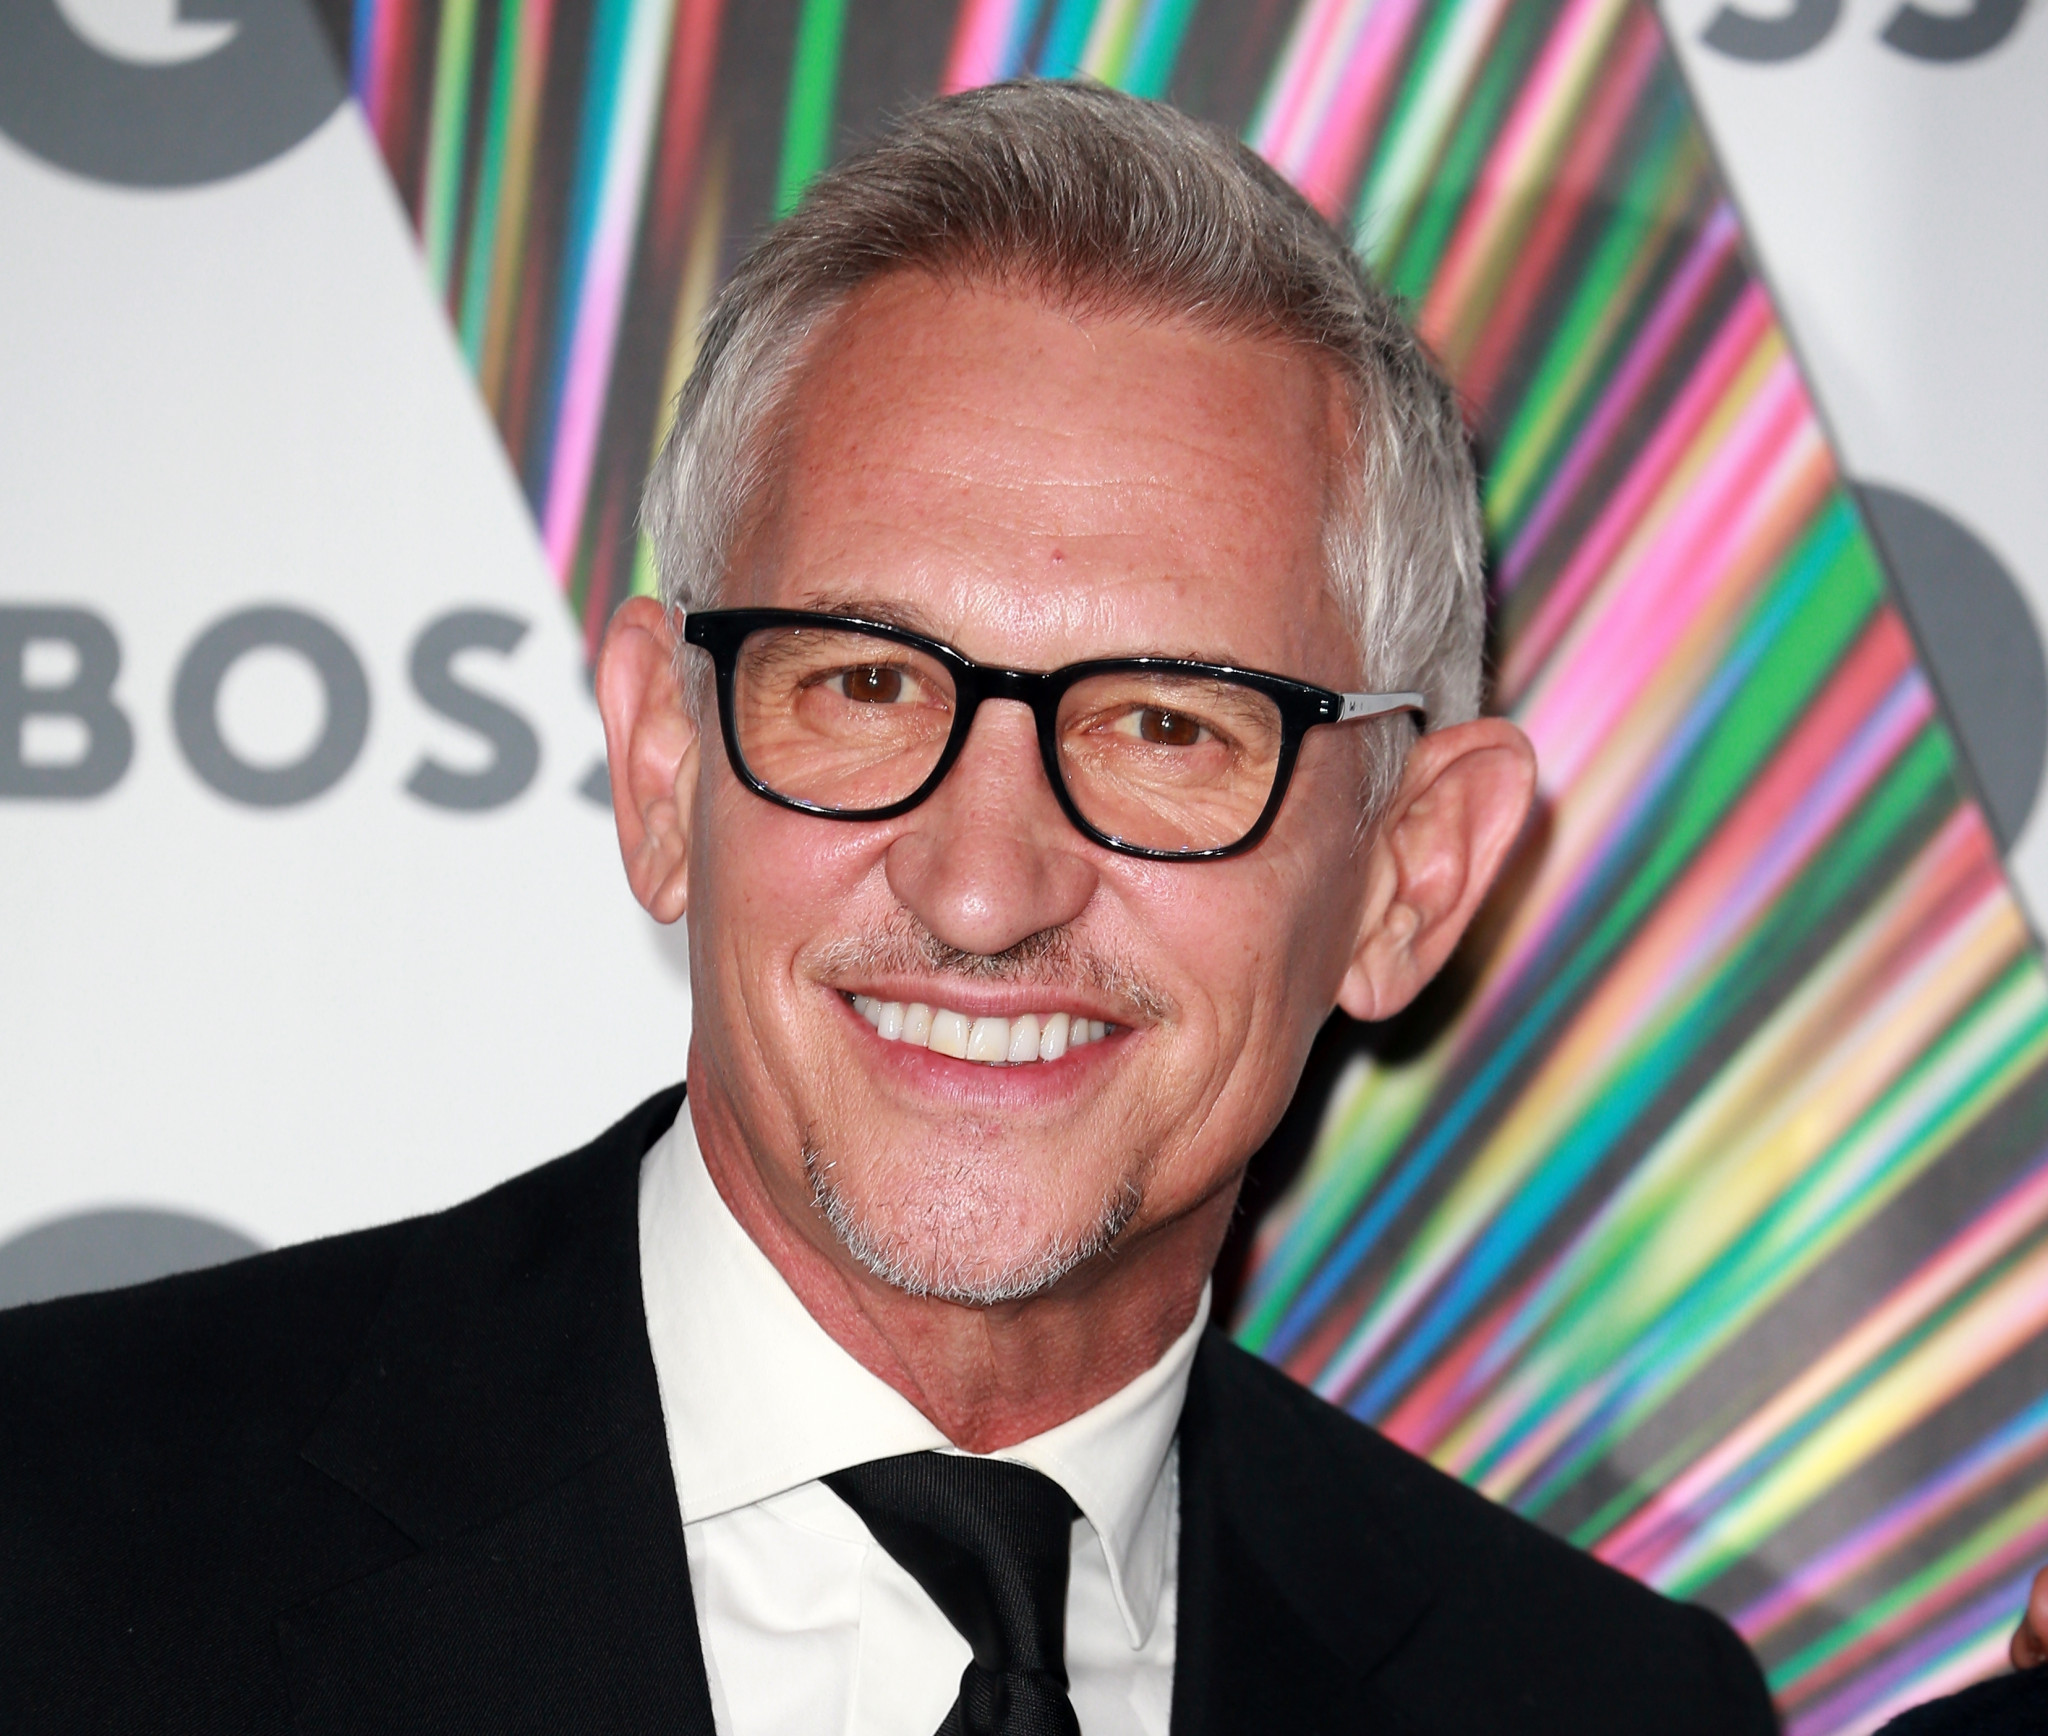 Objectivity and values: a brief comment on the Gary Lineker ‘controversy’